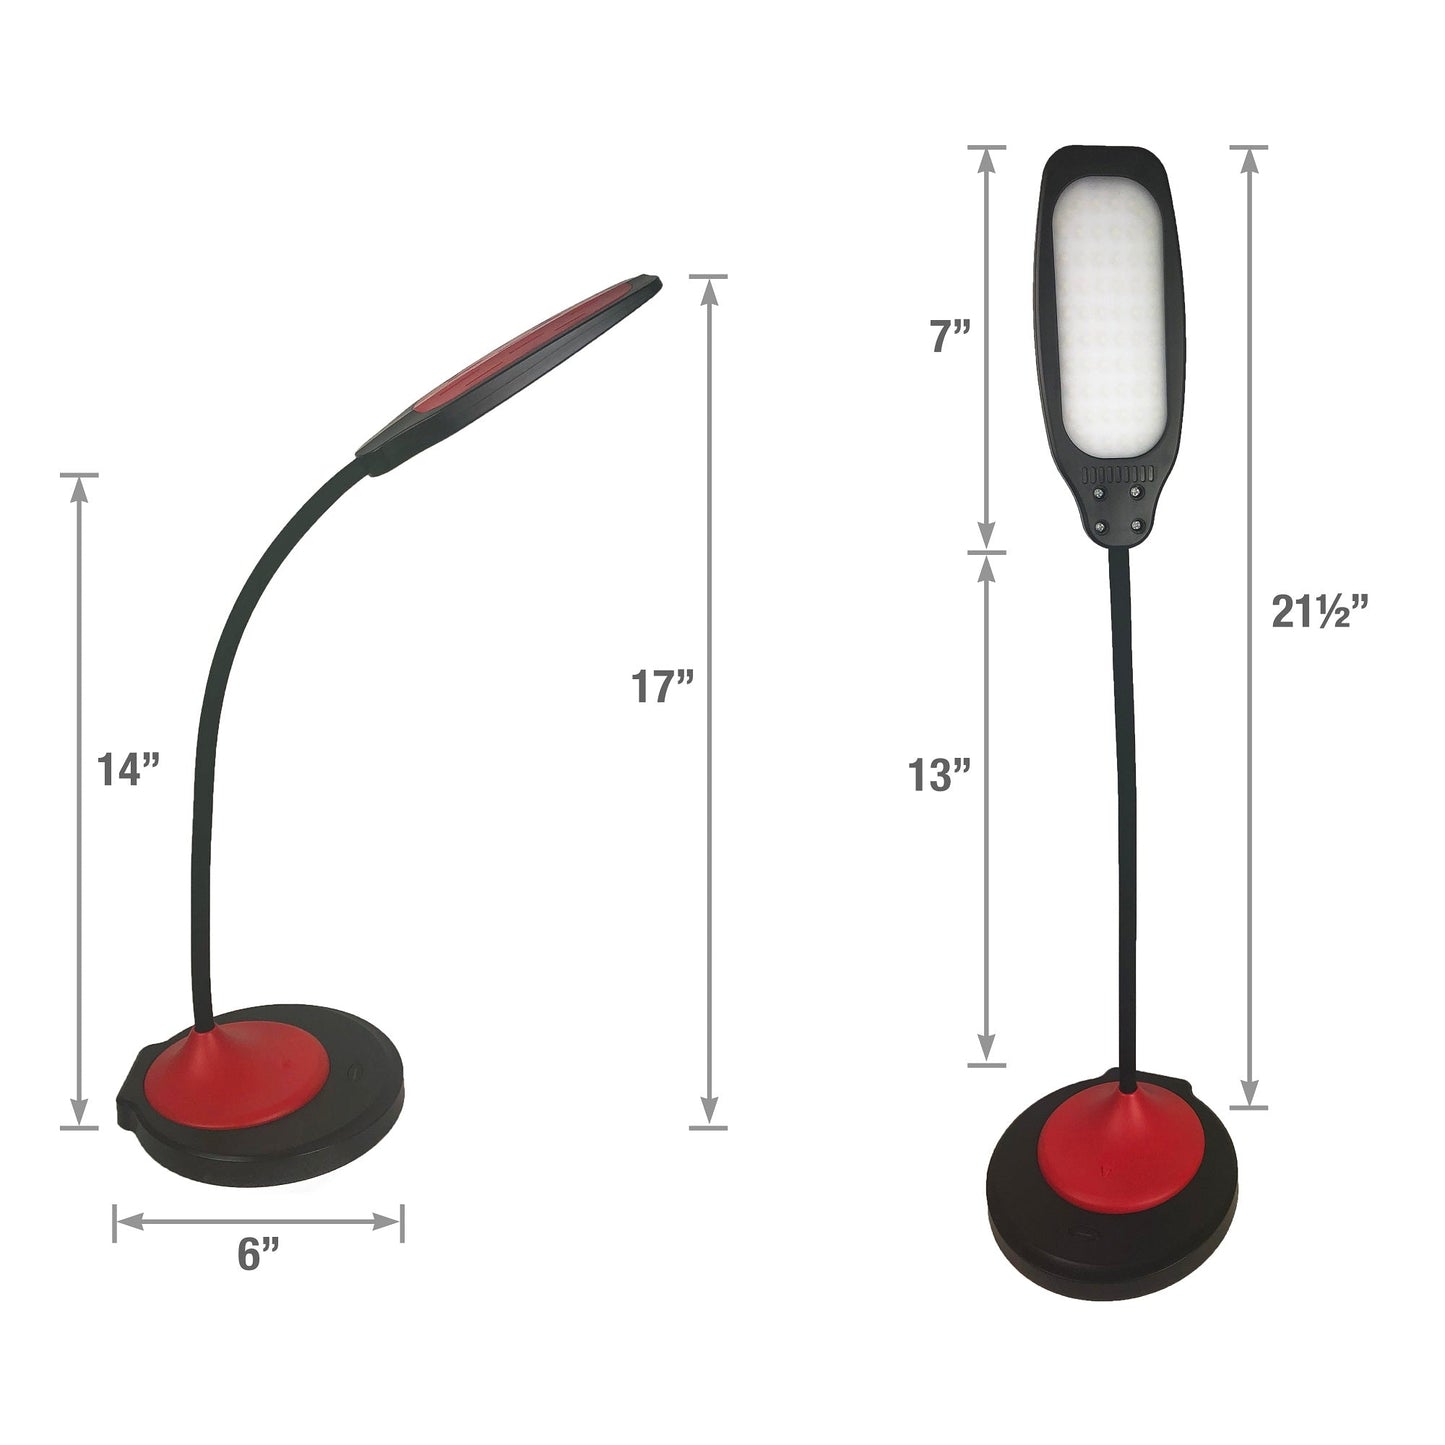 DAC® MP-350 Adjustable LED Desk Lamp/Table Lamp with USB Charging Port, Red and Black